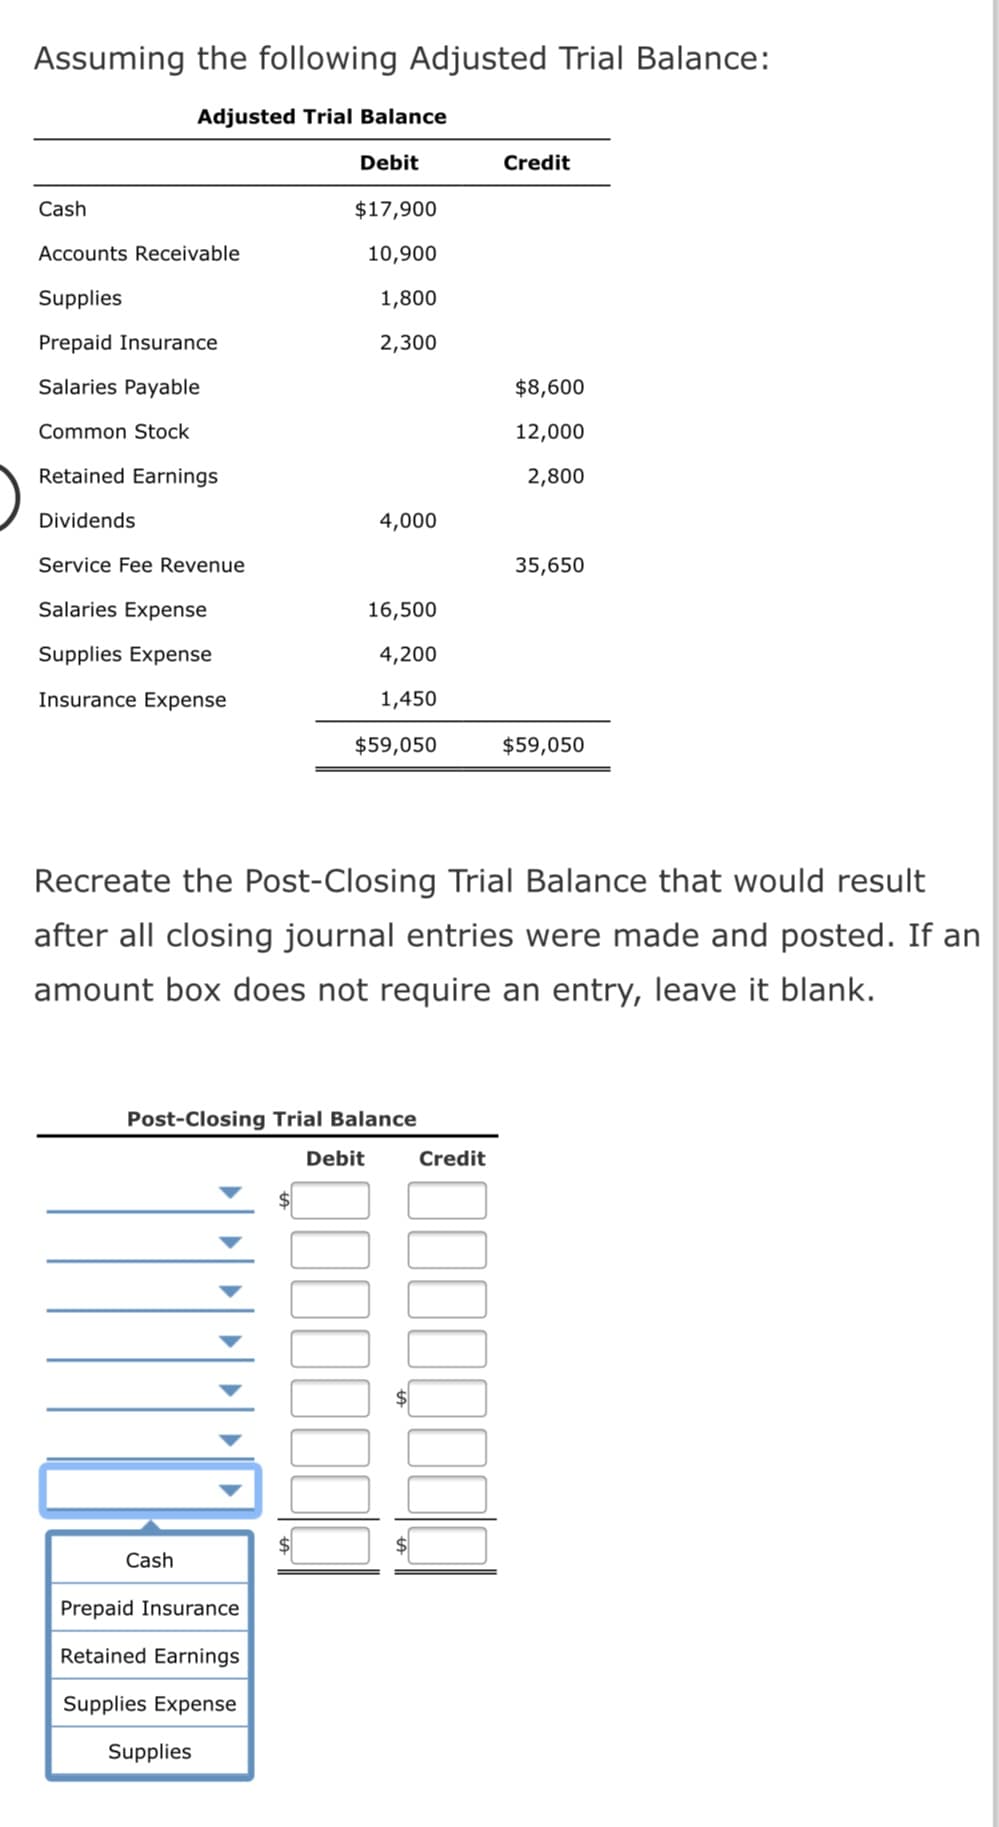 Assuming the following Adjusted Trial Balance:
Adjusted Trial Balance
Debit
Credit
Cash
$17,900
Accounts Receivable
10,900
Supplies
1,800
Prepaid Insurance
2,300
Salaries Payable
$8,600
Common Stock
12,000
Retained Earnings
2,800
Dividends
4,000
Service Fee Revenue
35,650
Salaries Expense
16,500
Supplies Expense
4,200
Insurance Expense
1,450
$59,050
$59,050
Recreate the Post-Closing Trial Balance that would result
after all closing journal entries were made and posted. If an
amount box does not require an entry, leave it blank.
Post-Closing Trial Balance
Debit
Credit
Cash
Prepaid Insurance
Retained Earnings
Supplies Expense
Supplies
